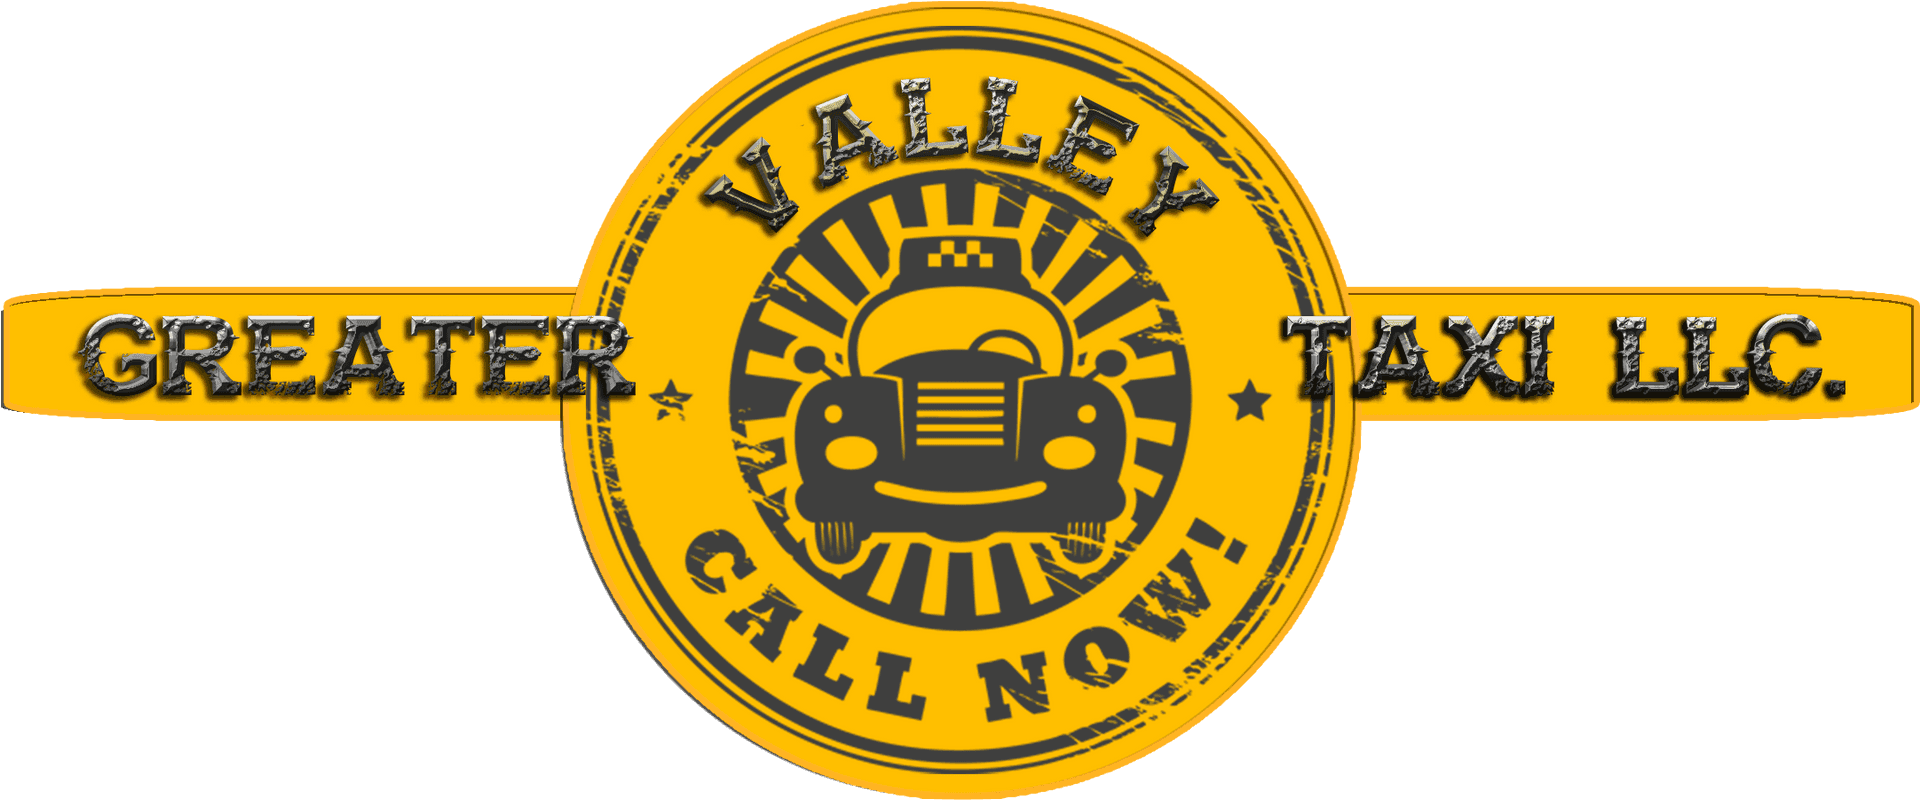 Greater Valley Taxi Logo PNG